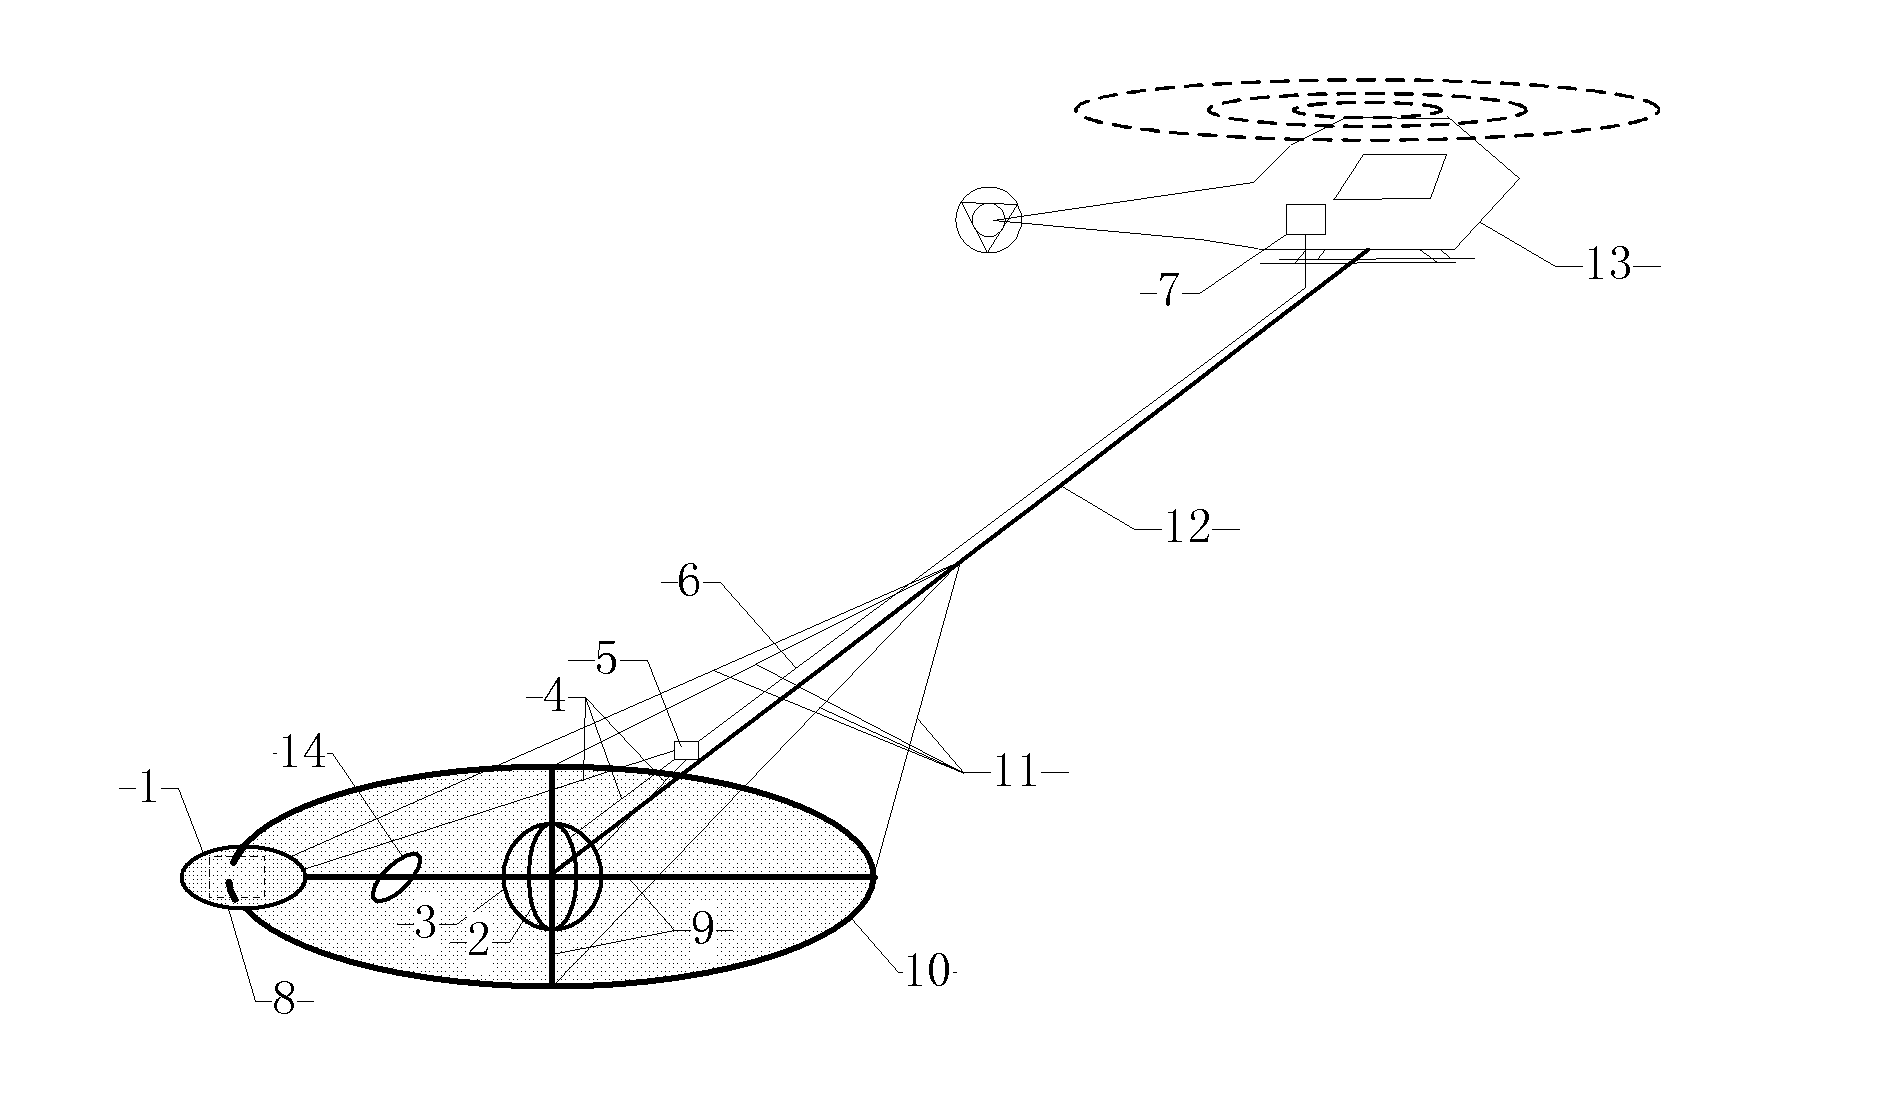 Primary field self-counteracting device for time-domain airborne electromagnetic method